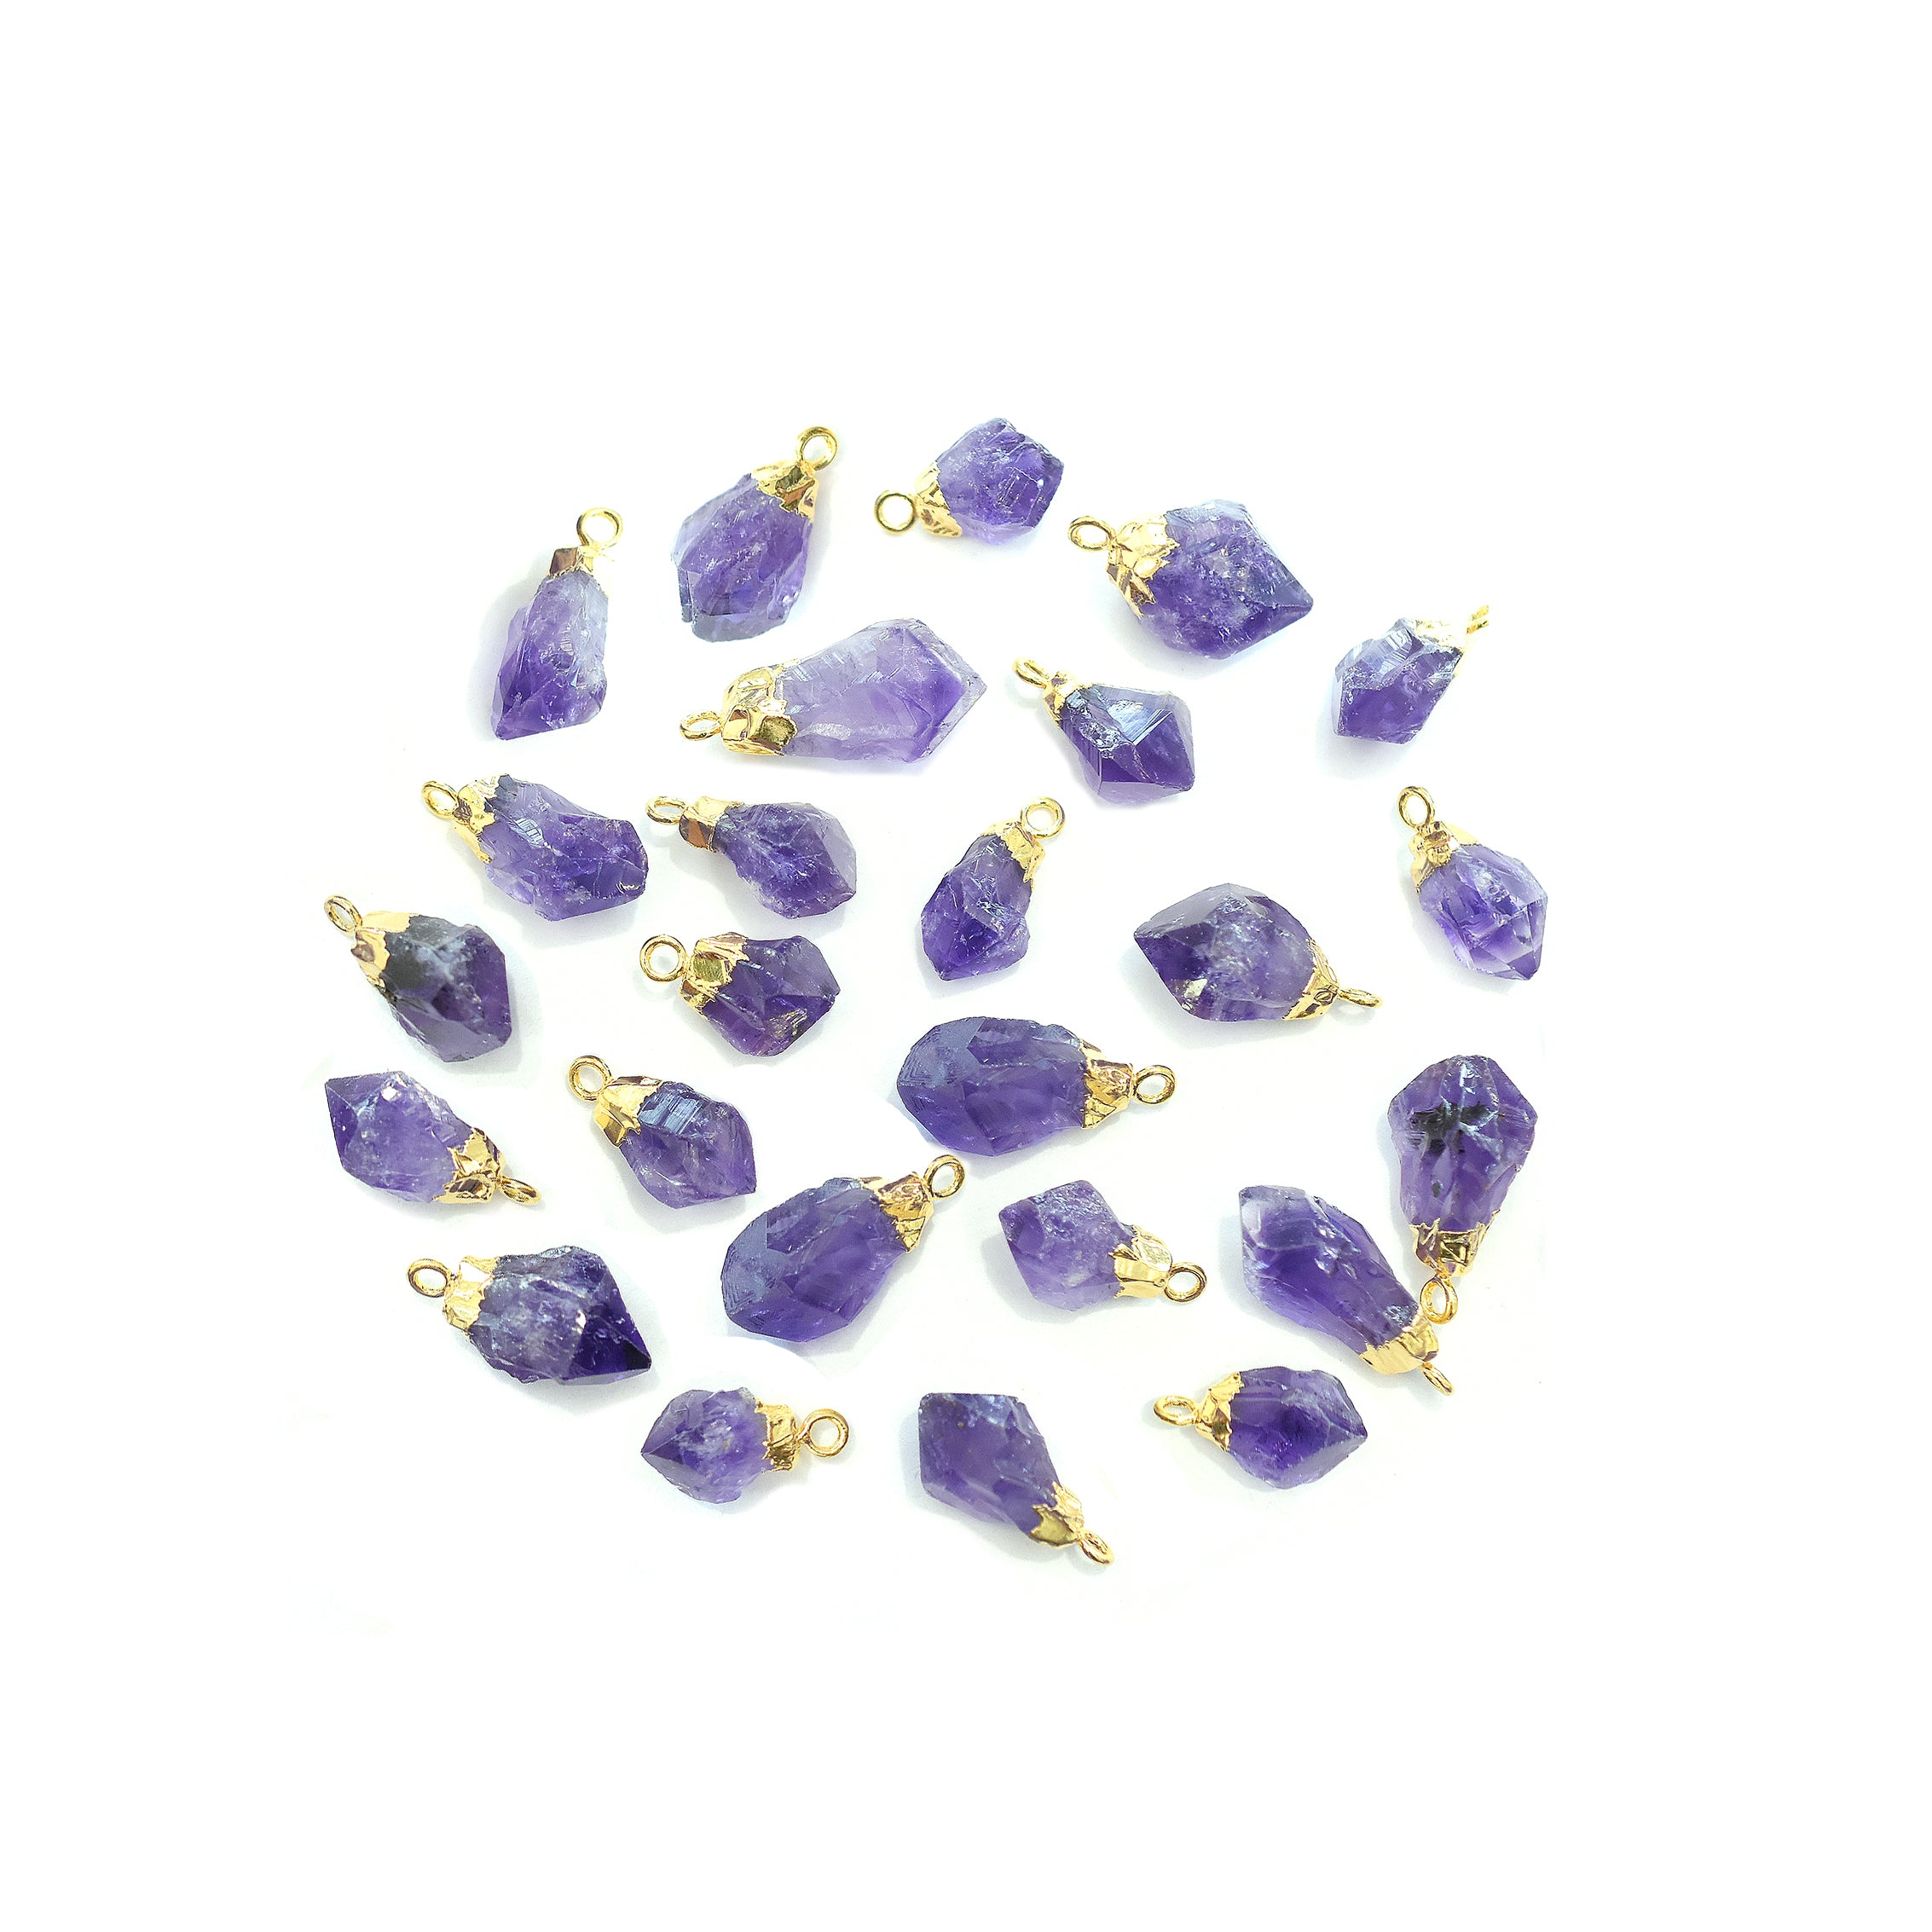 Amethyst 8X5 To 10X6 MM Rough Shape Gold Electroplated Pendant (Set Of 2 Pcs)